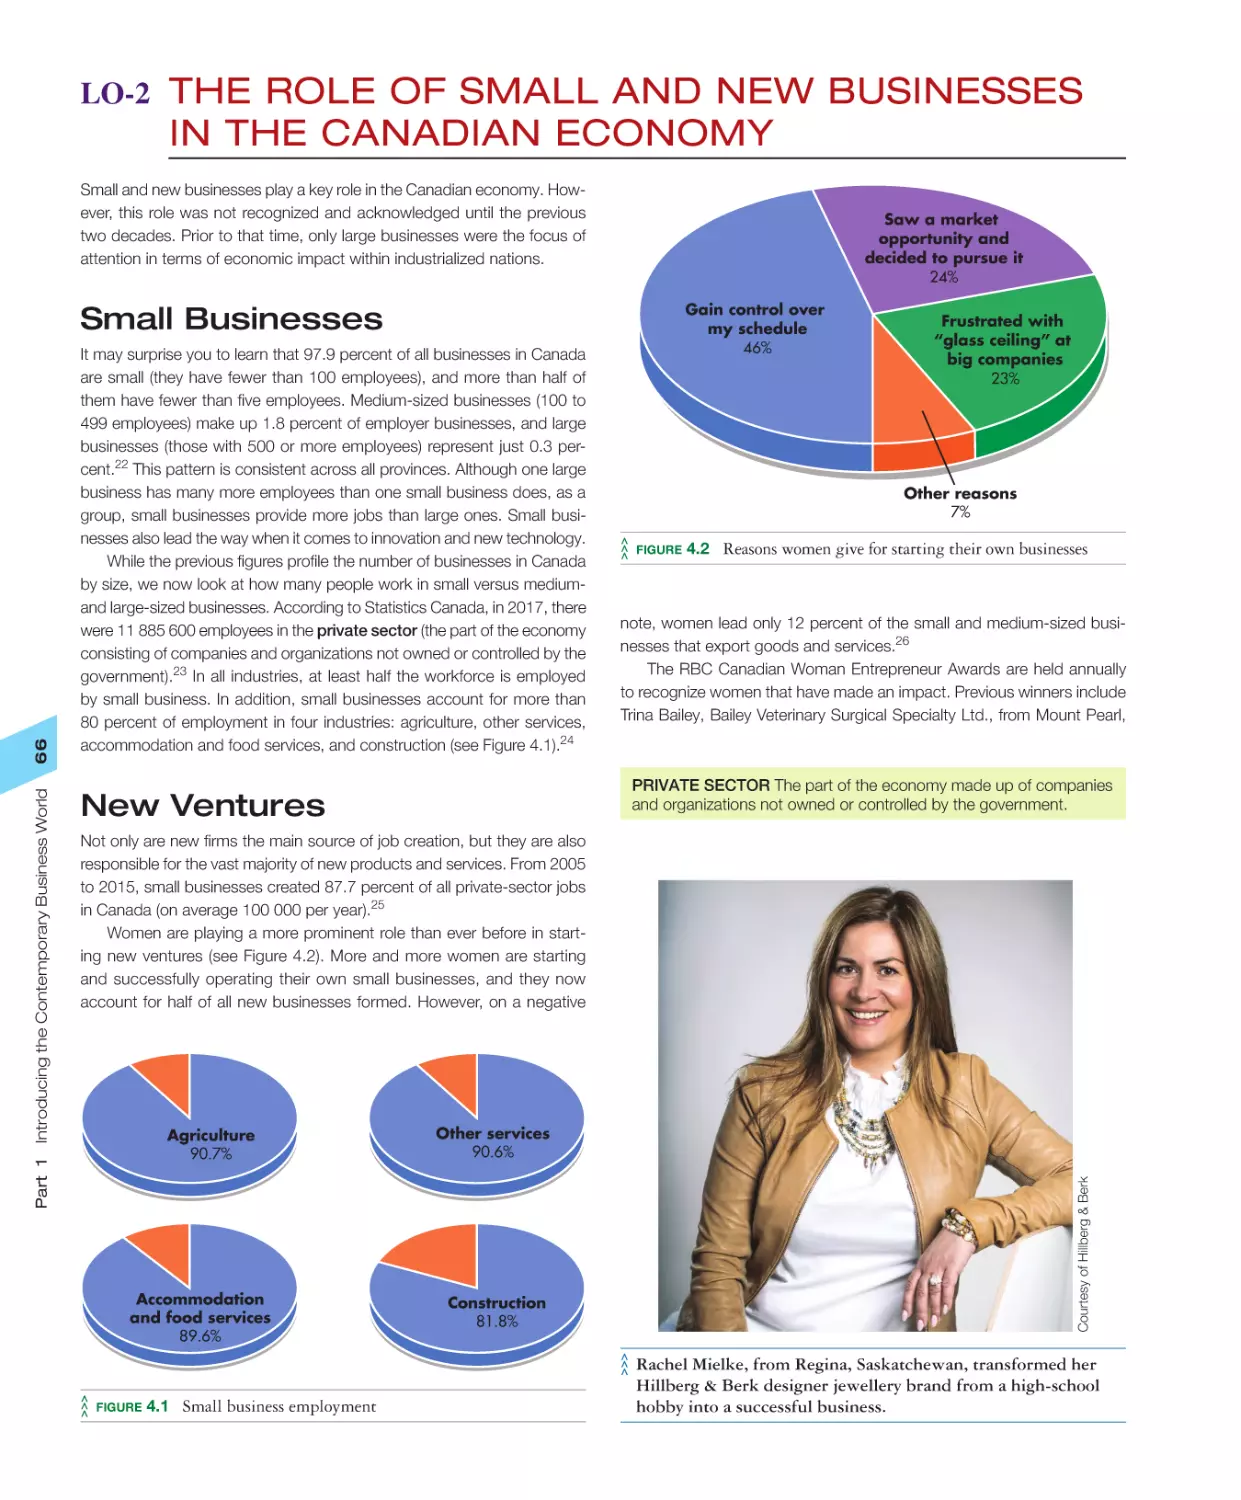 LO‐2 The Role of Small and New Businesses in the Canadian Economy
New Ventures